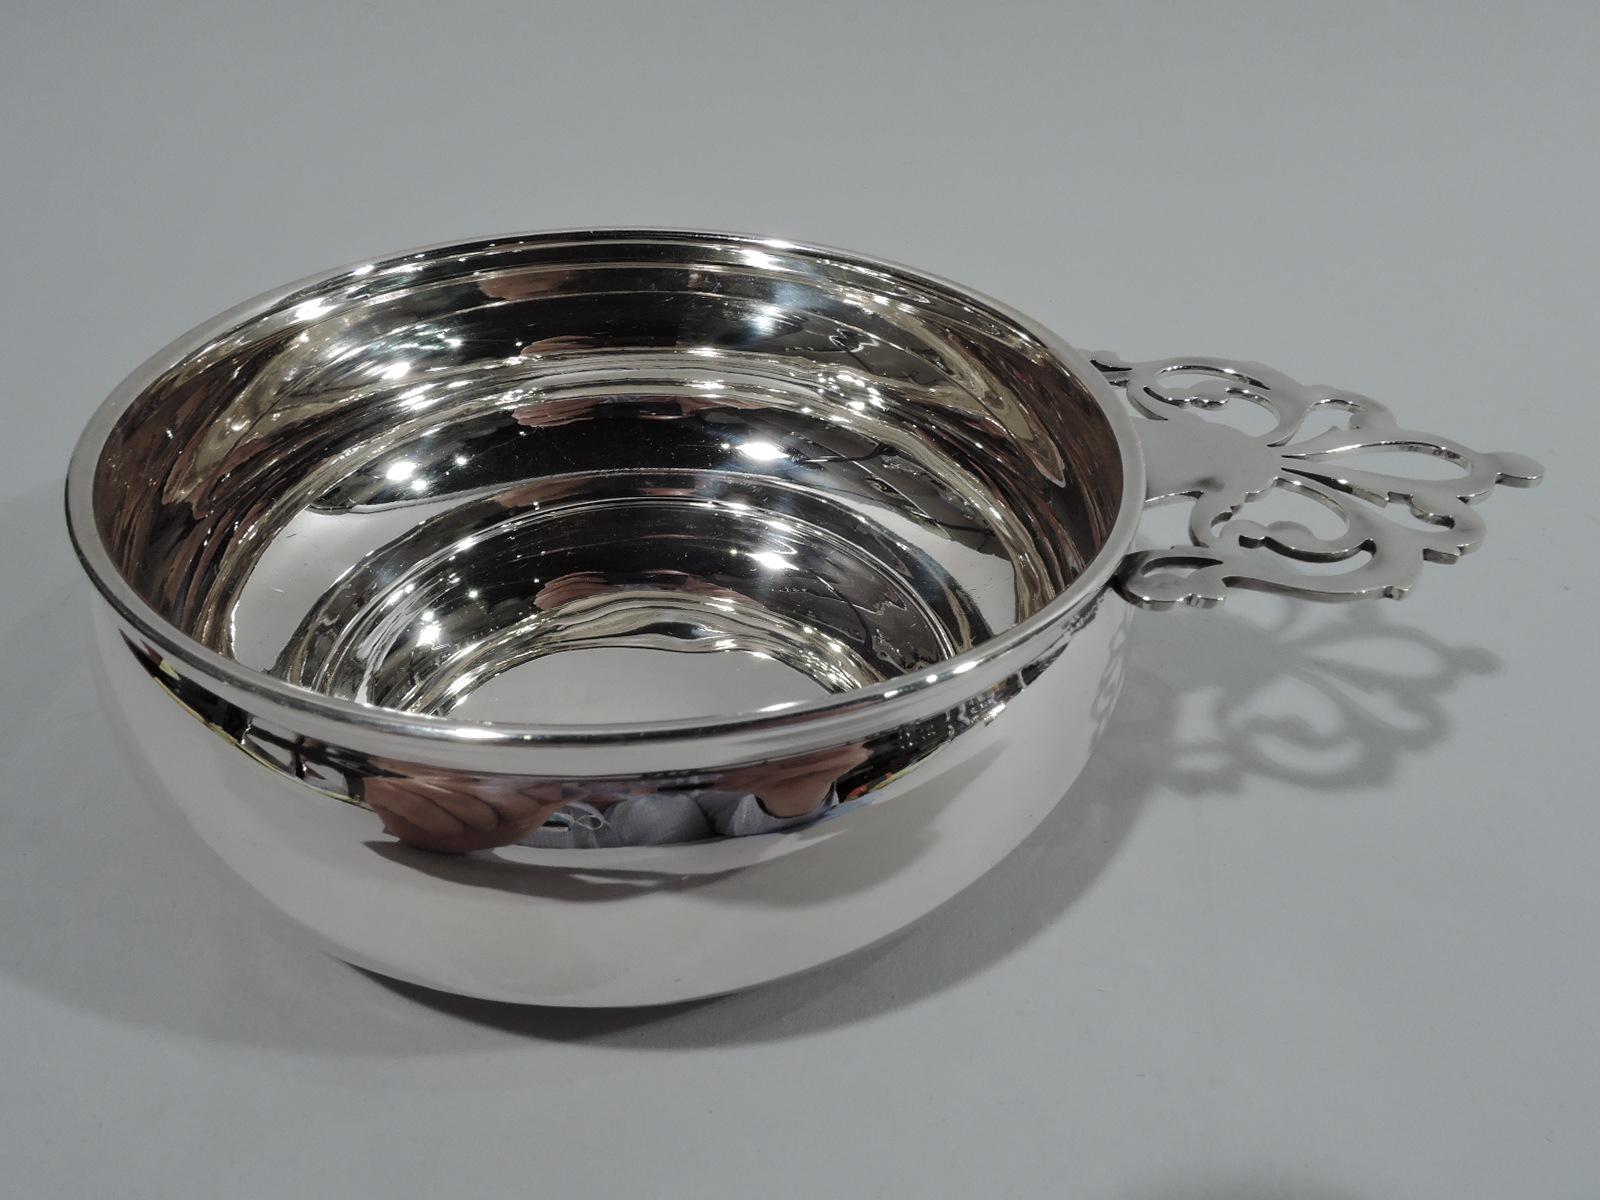 Traditional American sterling silver porringer. Round and curved bowl and open scrolled handle. Plenty of room for engraving. Marked “Sterling / 560”. Weight: 3 troy ounces.